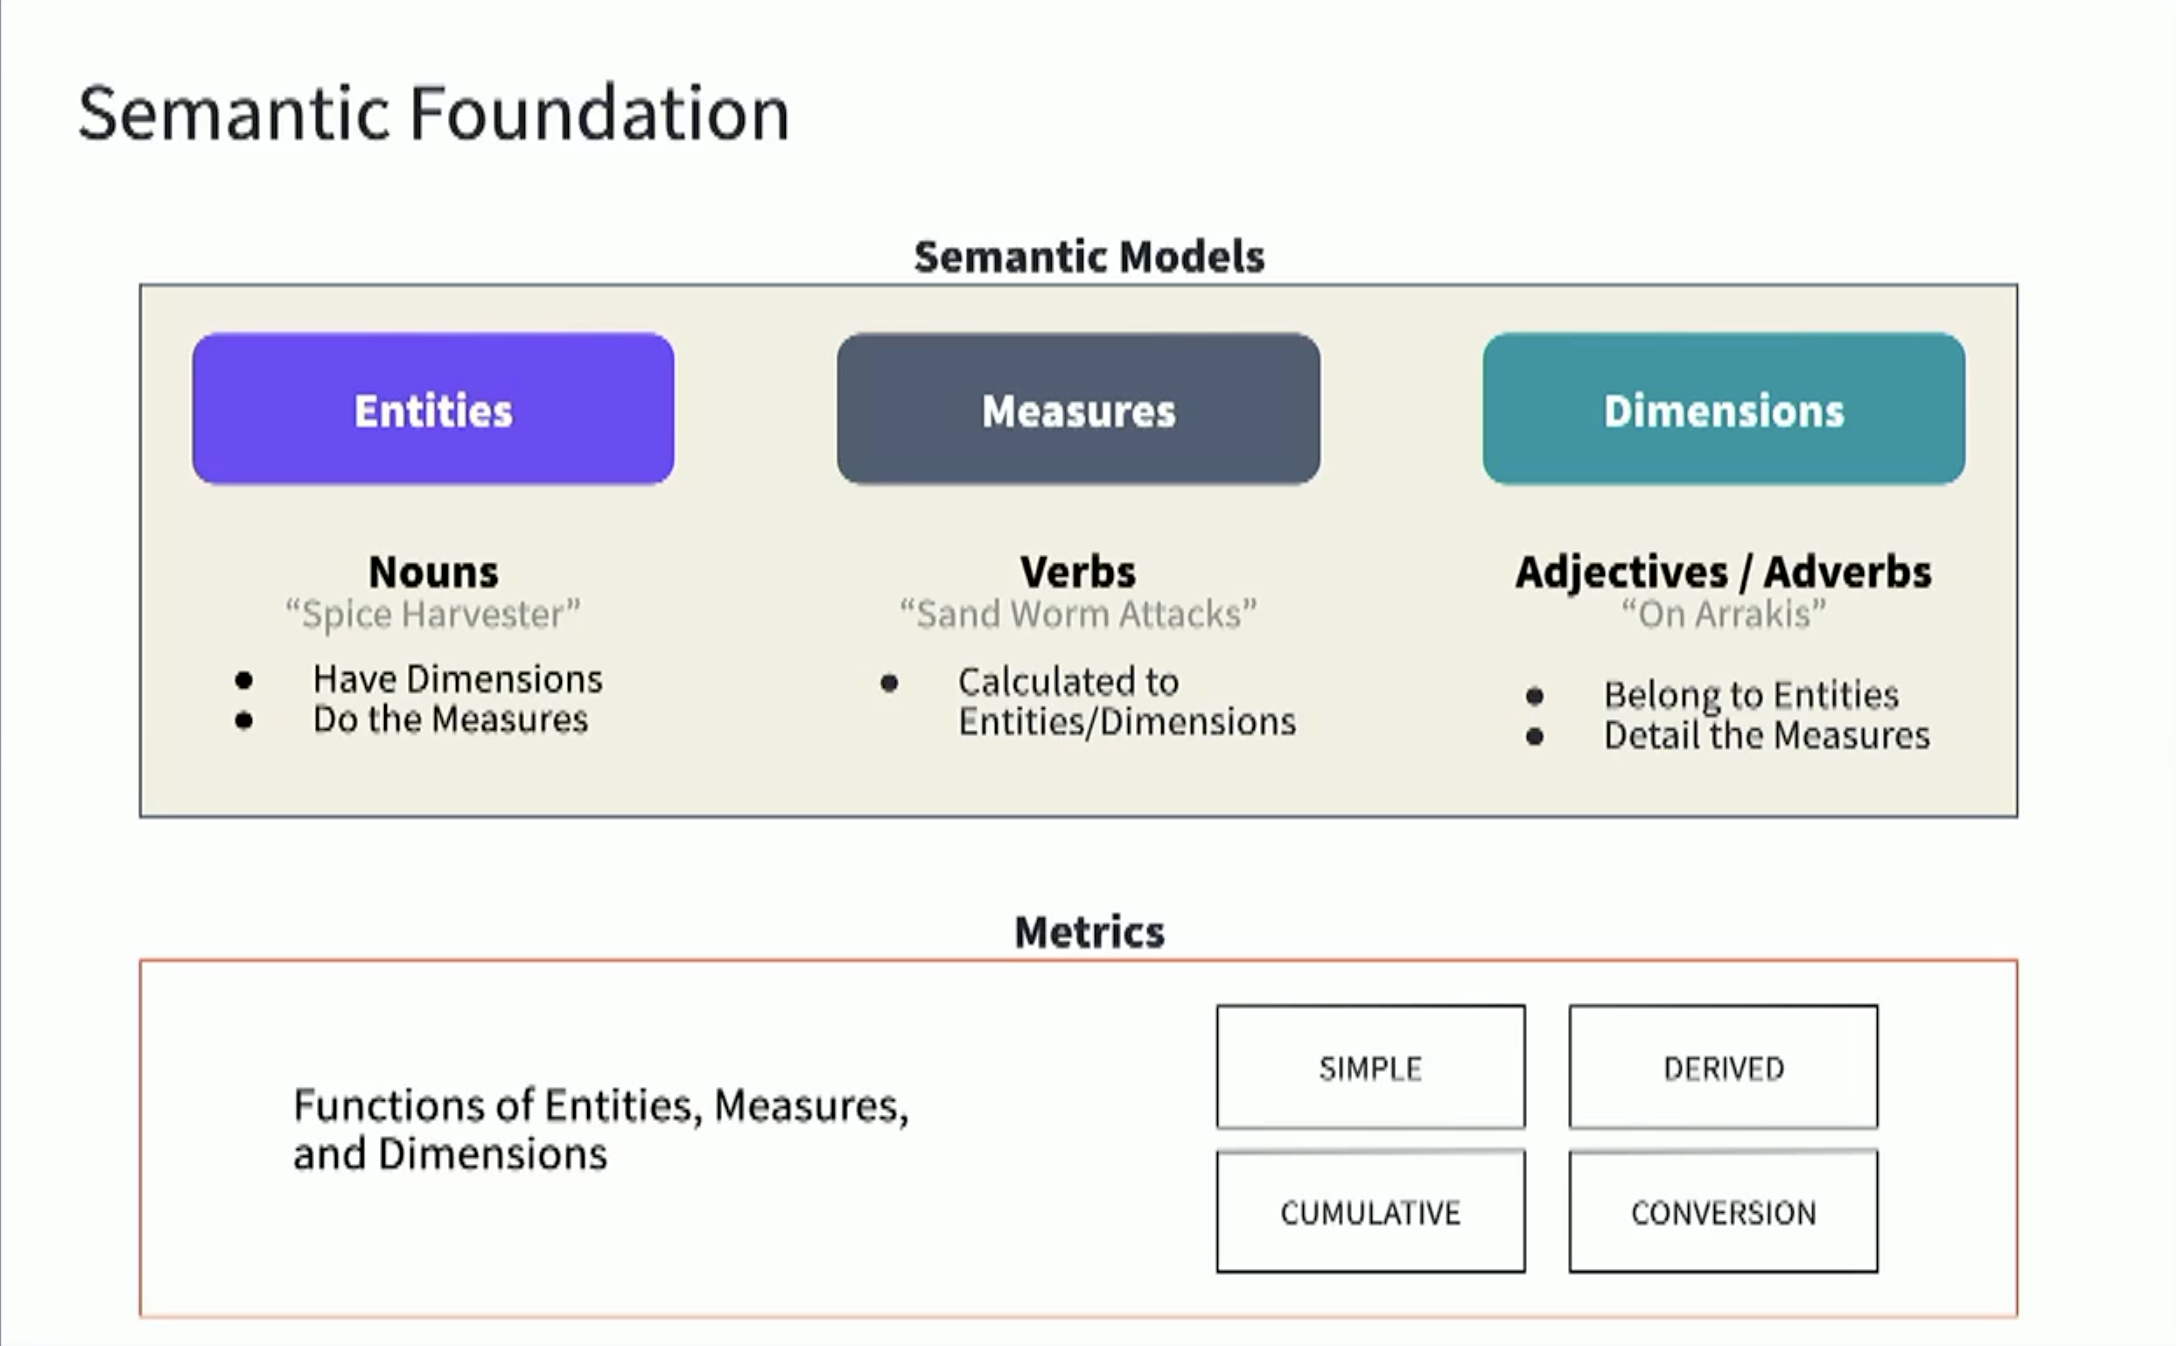 A semantic model is made up of different components: Entities, Measures, and Dimensions.